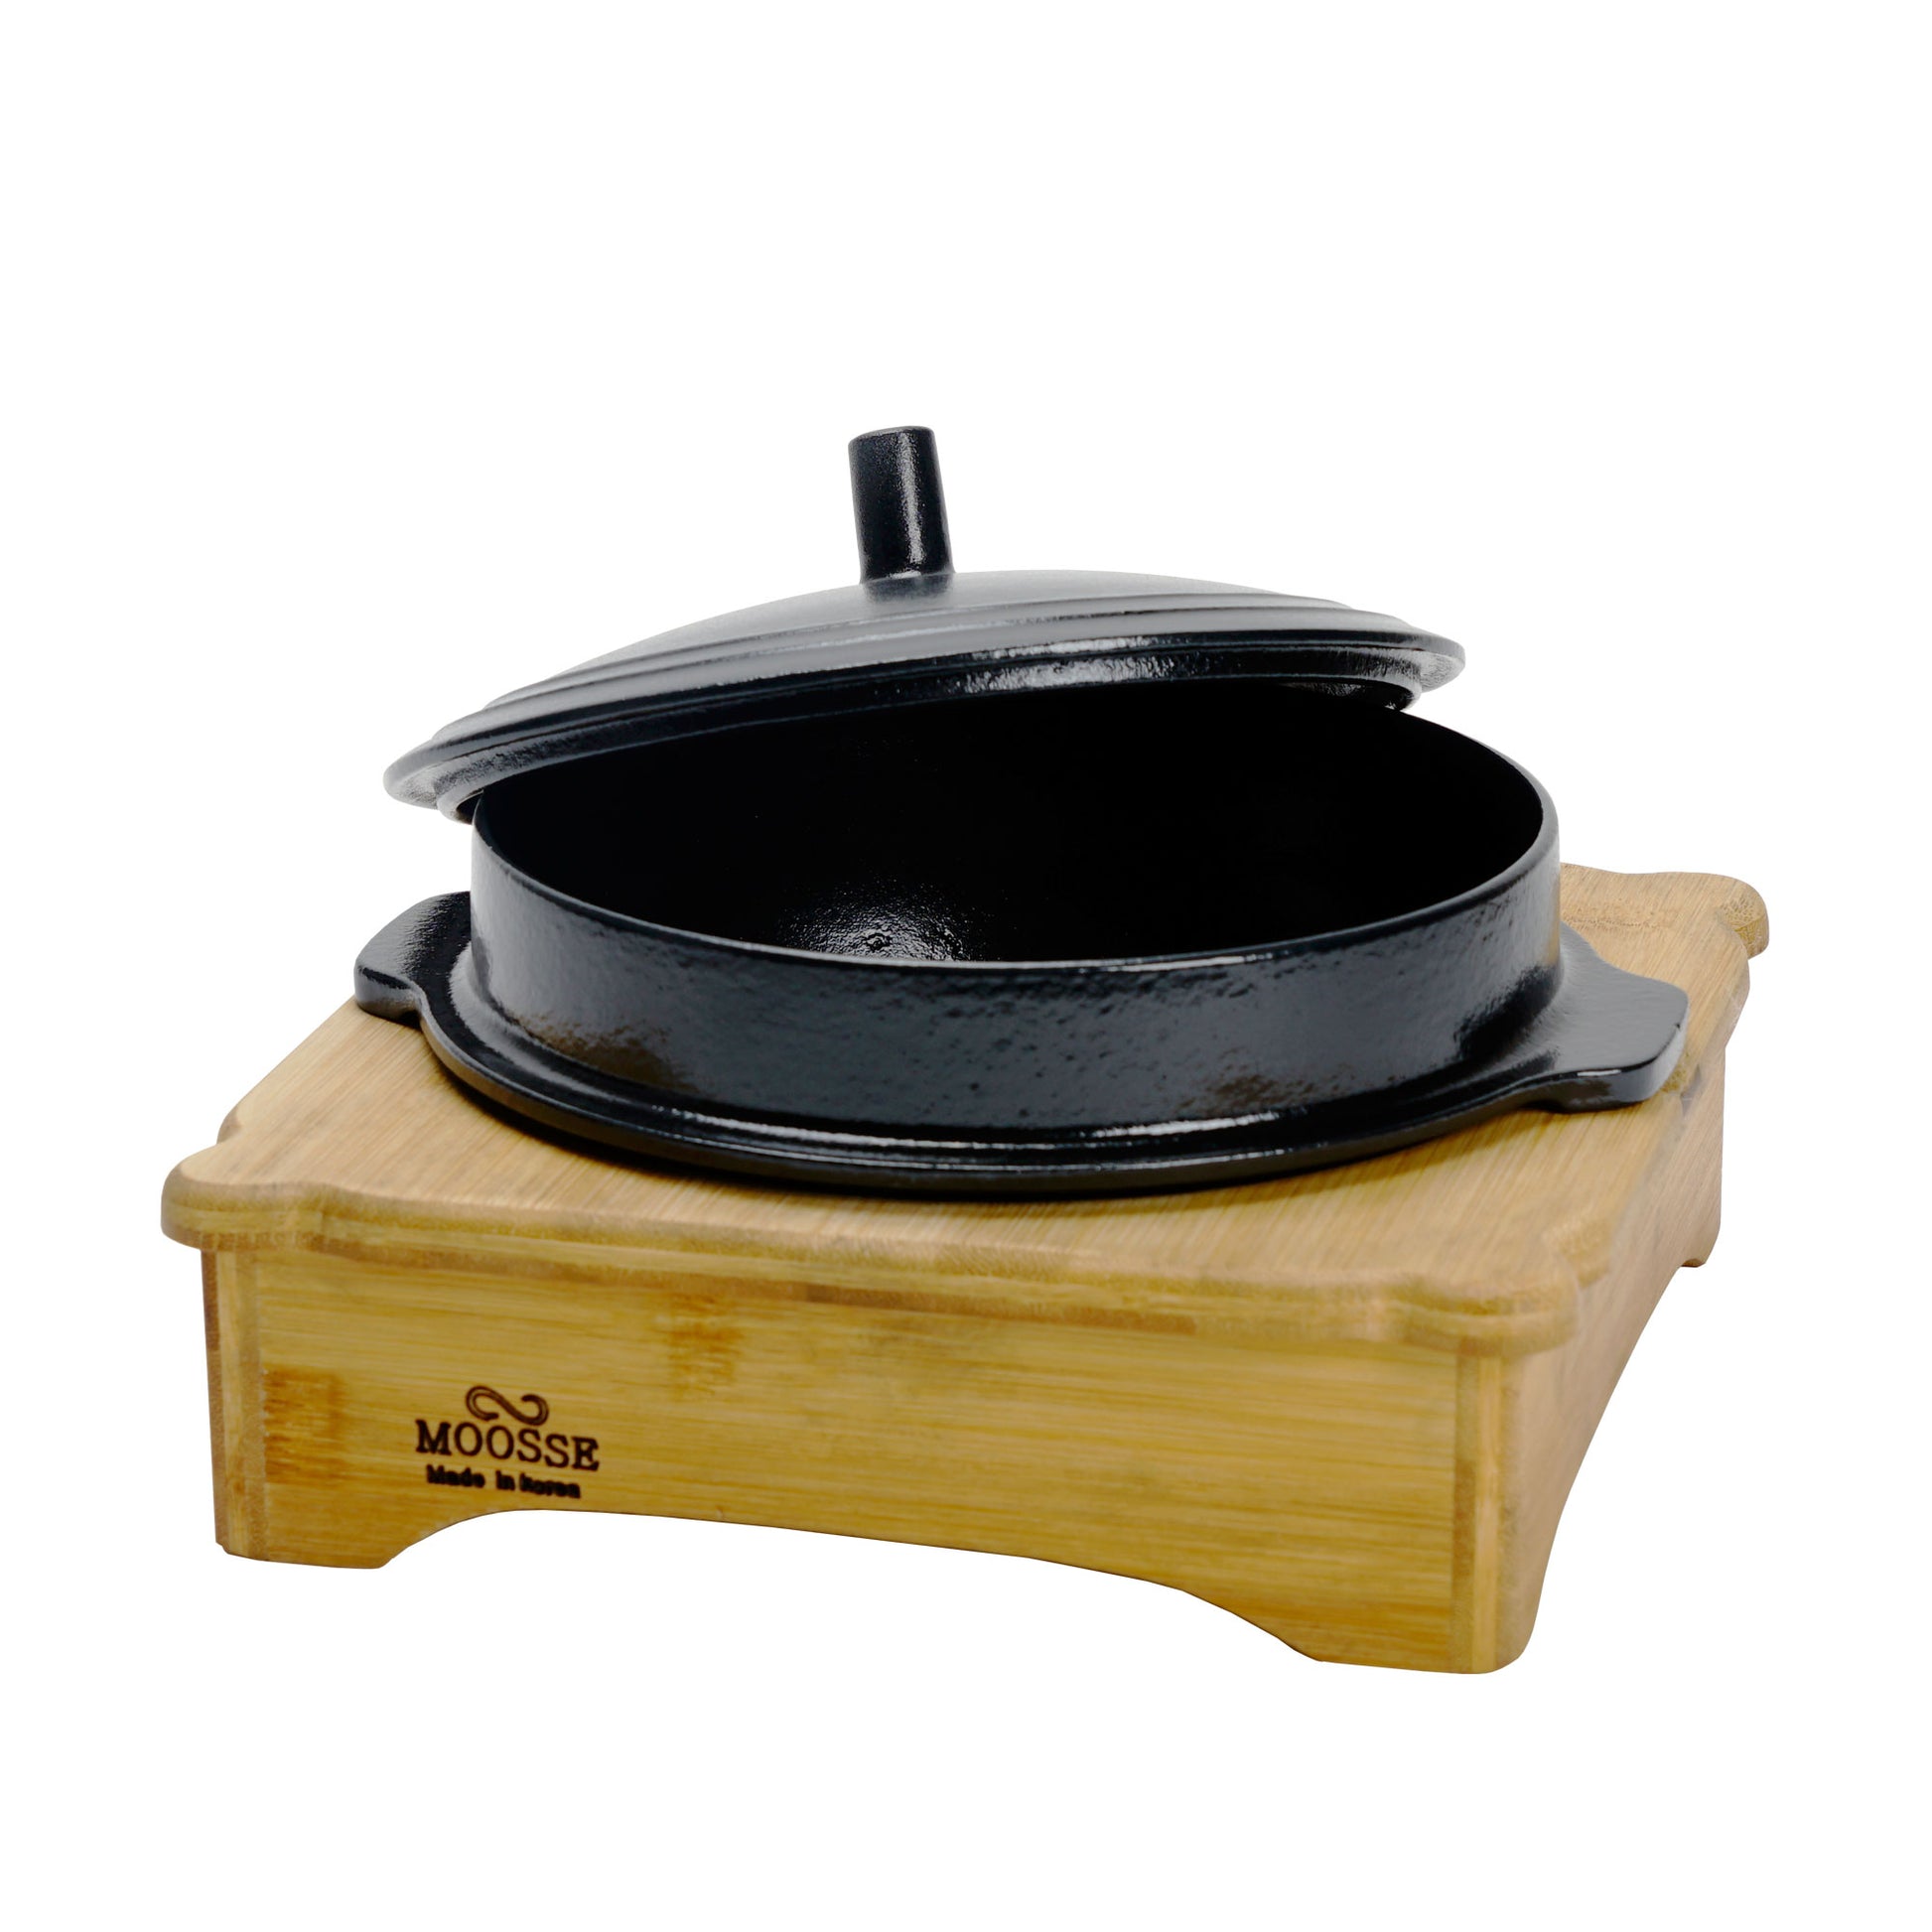 Korean Cast Iron Traditional Cooking Pot with Lid, Gamasot 가마솥